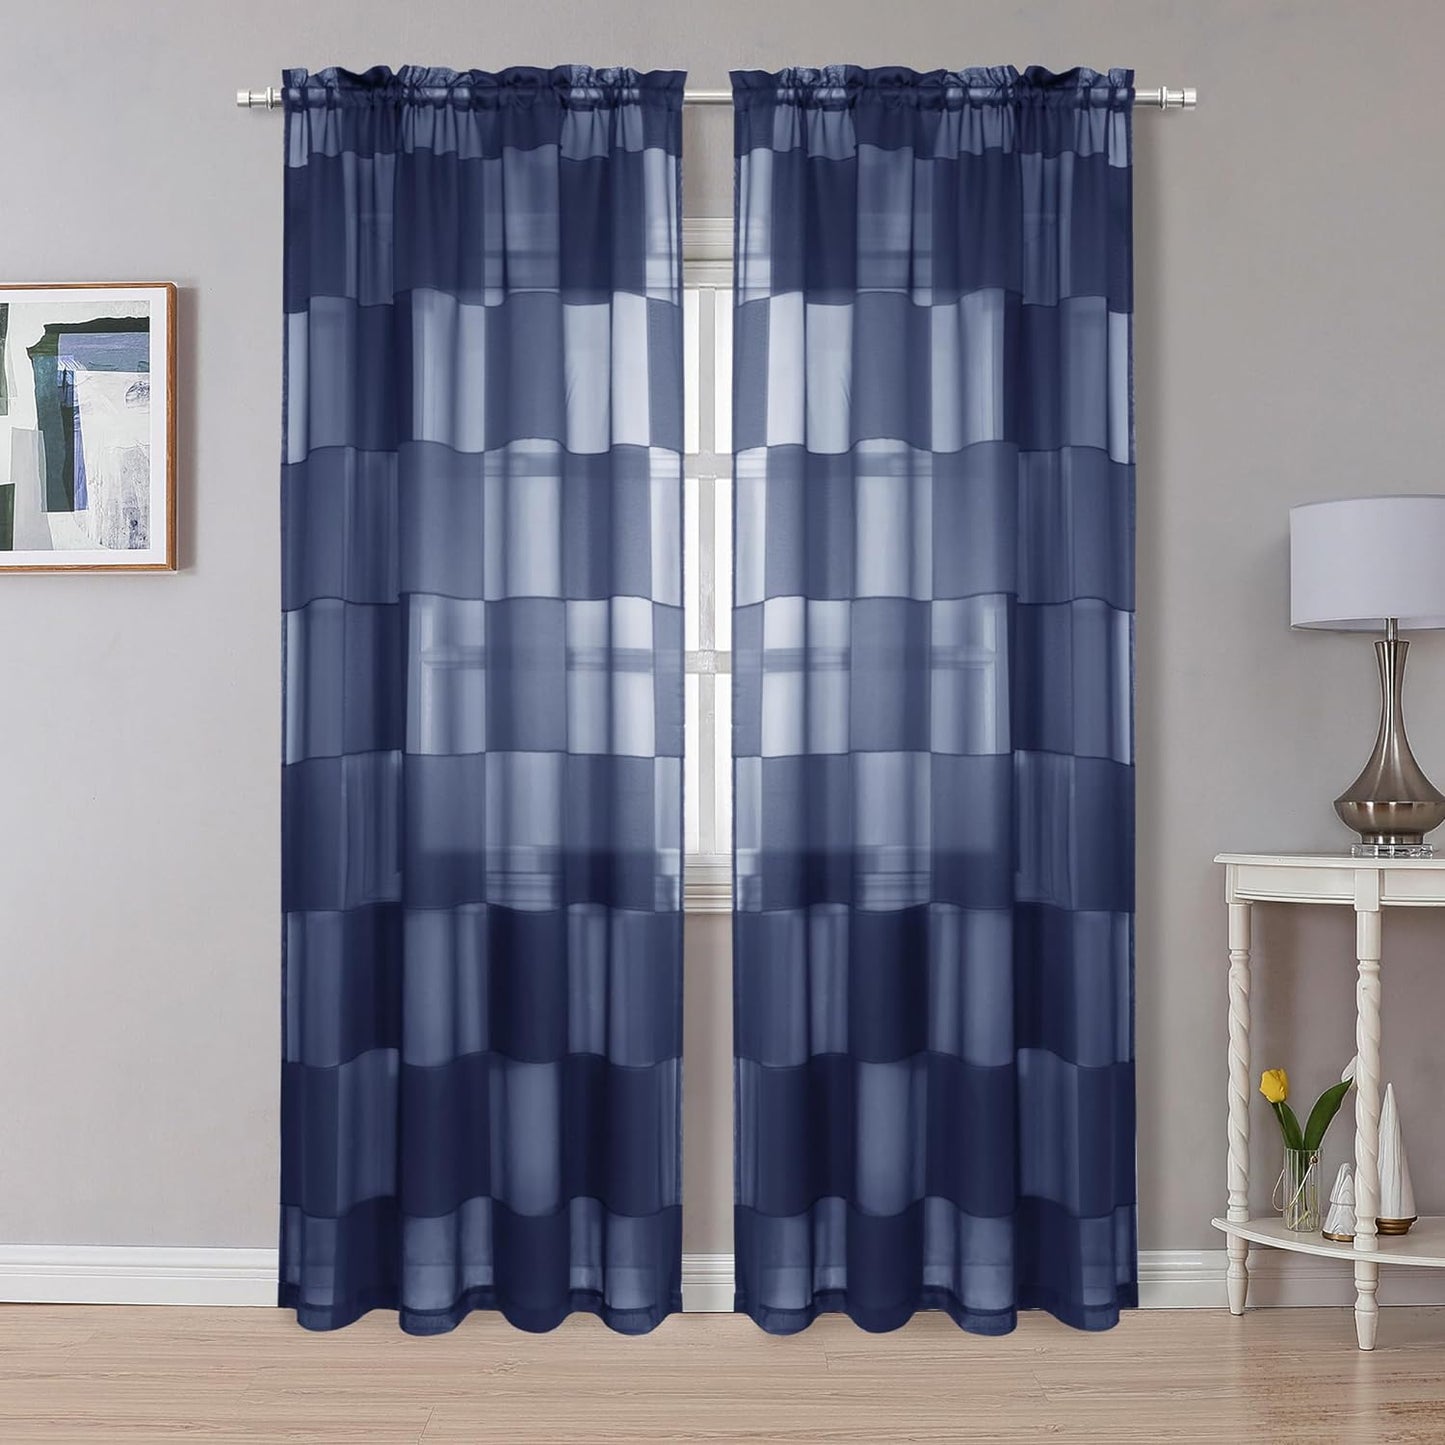 OVZME Sage Green Sheer Bedroom Curtains 84 Inch Length 2 Panels Set, Dual Rod Pocket Clip Checkered Window Curtains for Living Room, Light Filtering & Privacy Sheer Green Drapes, Each 42W X 84L  OVZME Navy Blue 42W X 84L 